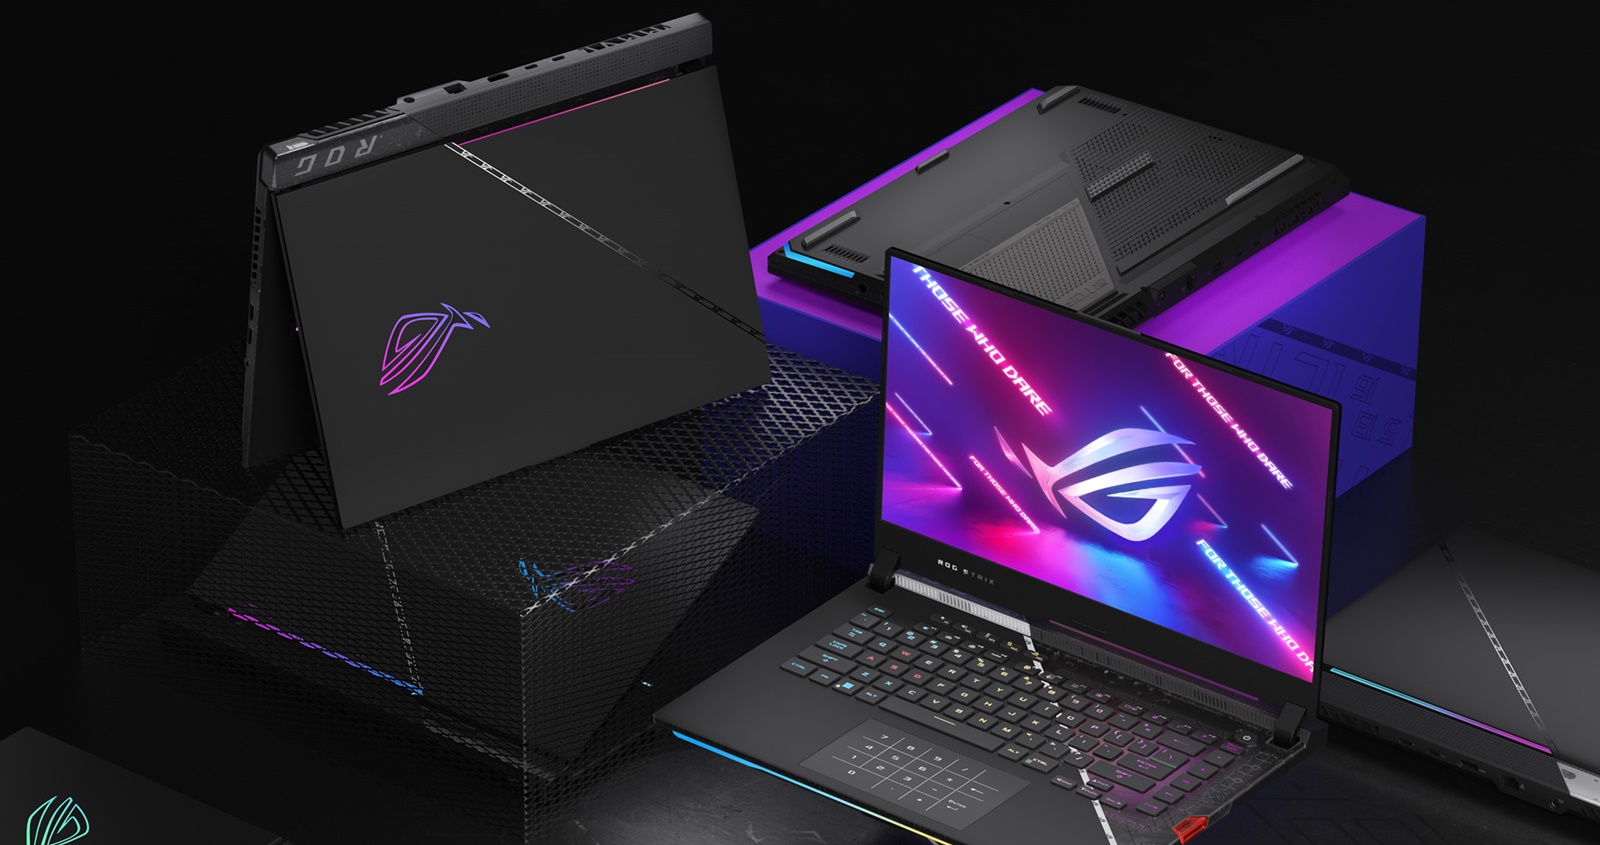 CES 2022: ASUS introduces new Strix Scar and Strix G gaming laptops;  They come with top AMD or Intel CPUs, RTX 3080 Ti graphics thumbnail